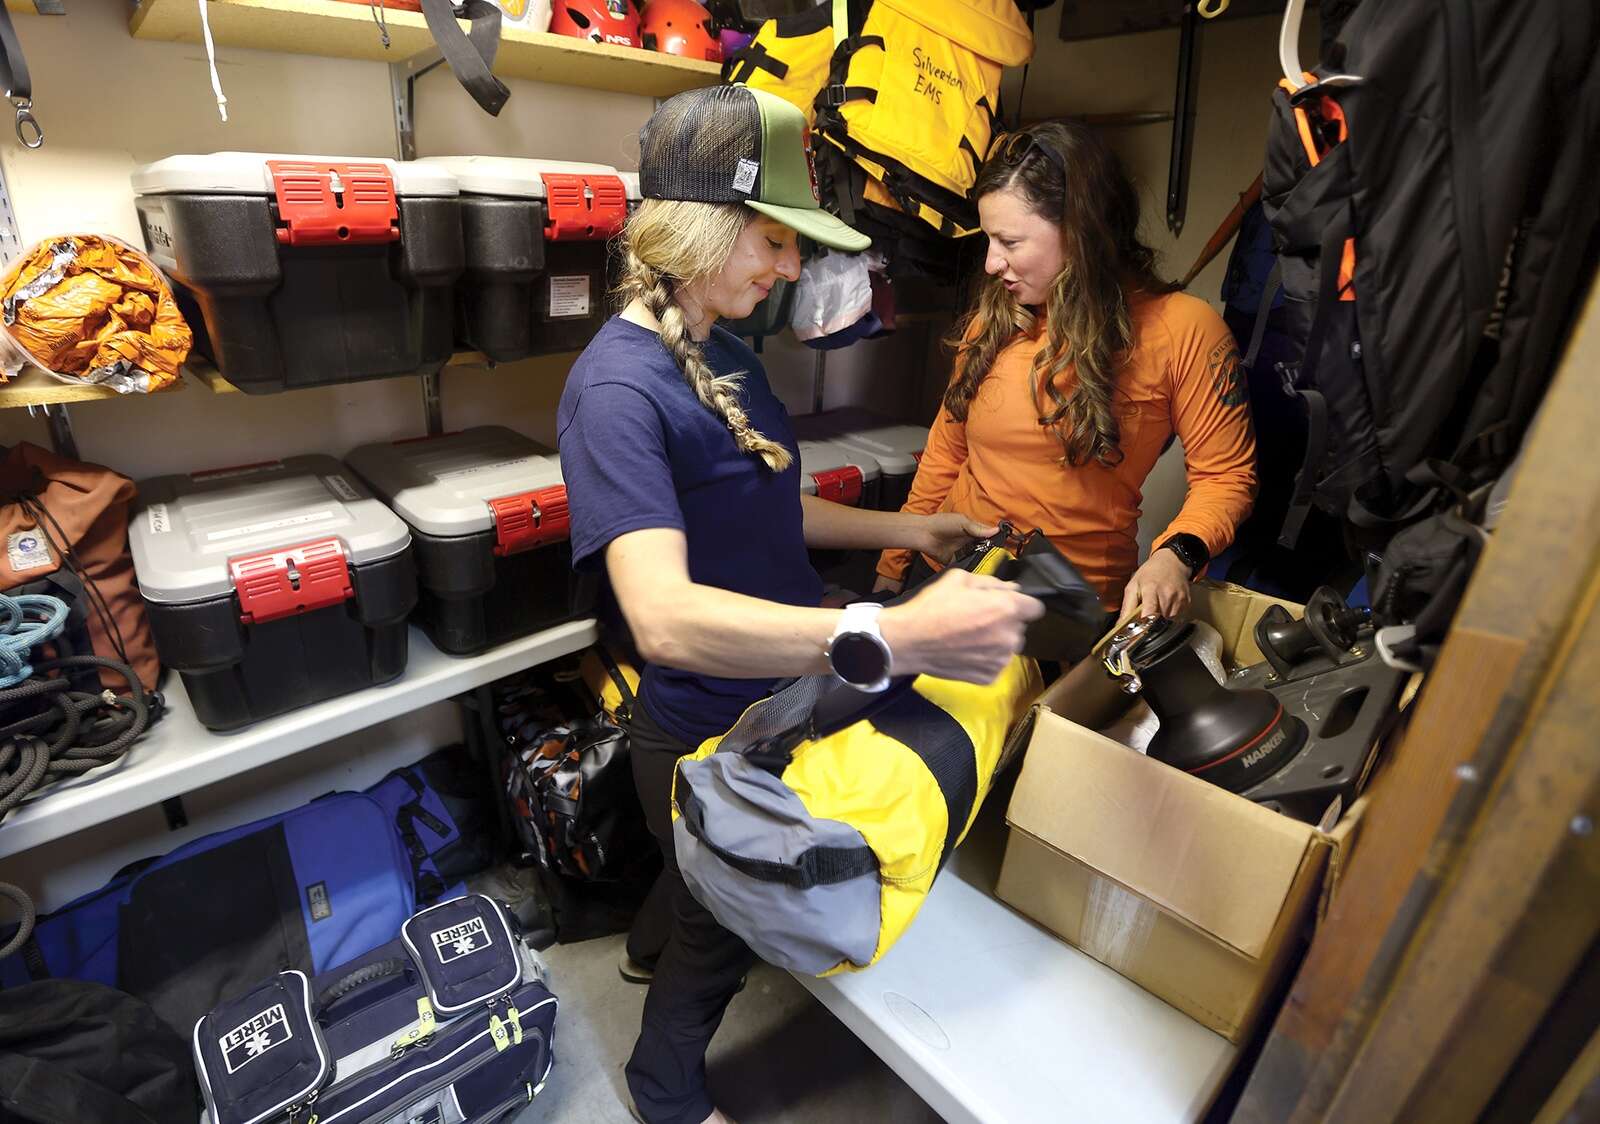 In rugged San Juan County, more women than men involved with search and  rescue – The Durango Herald